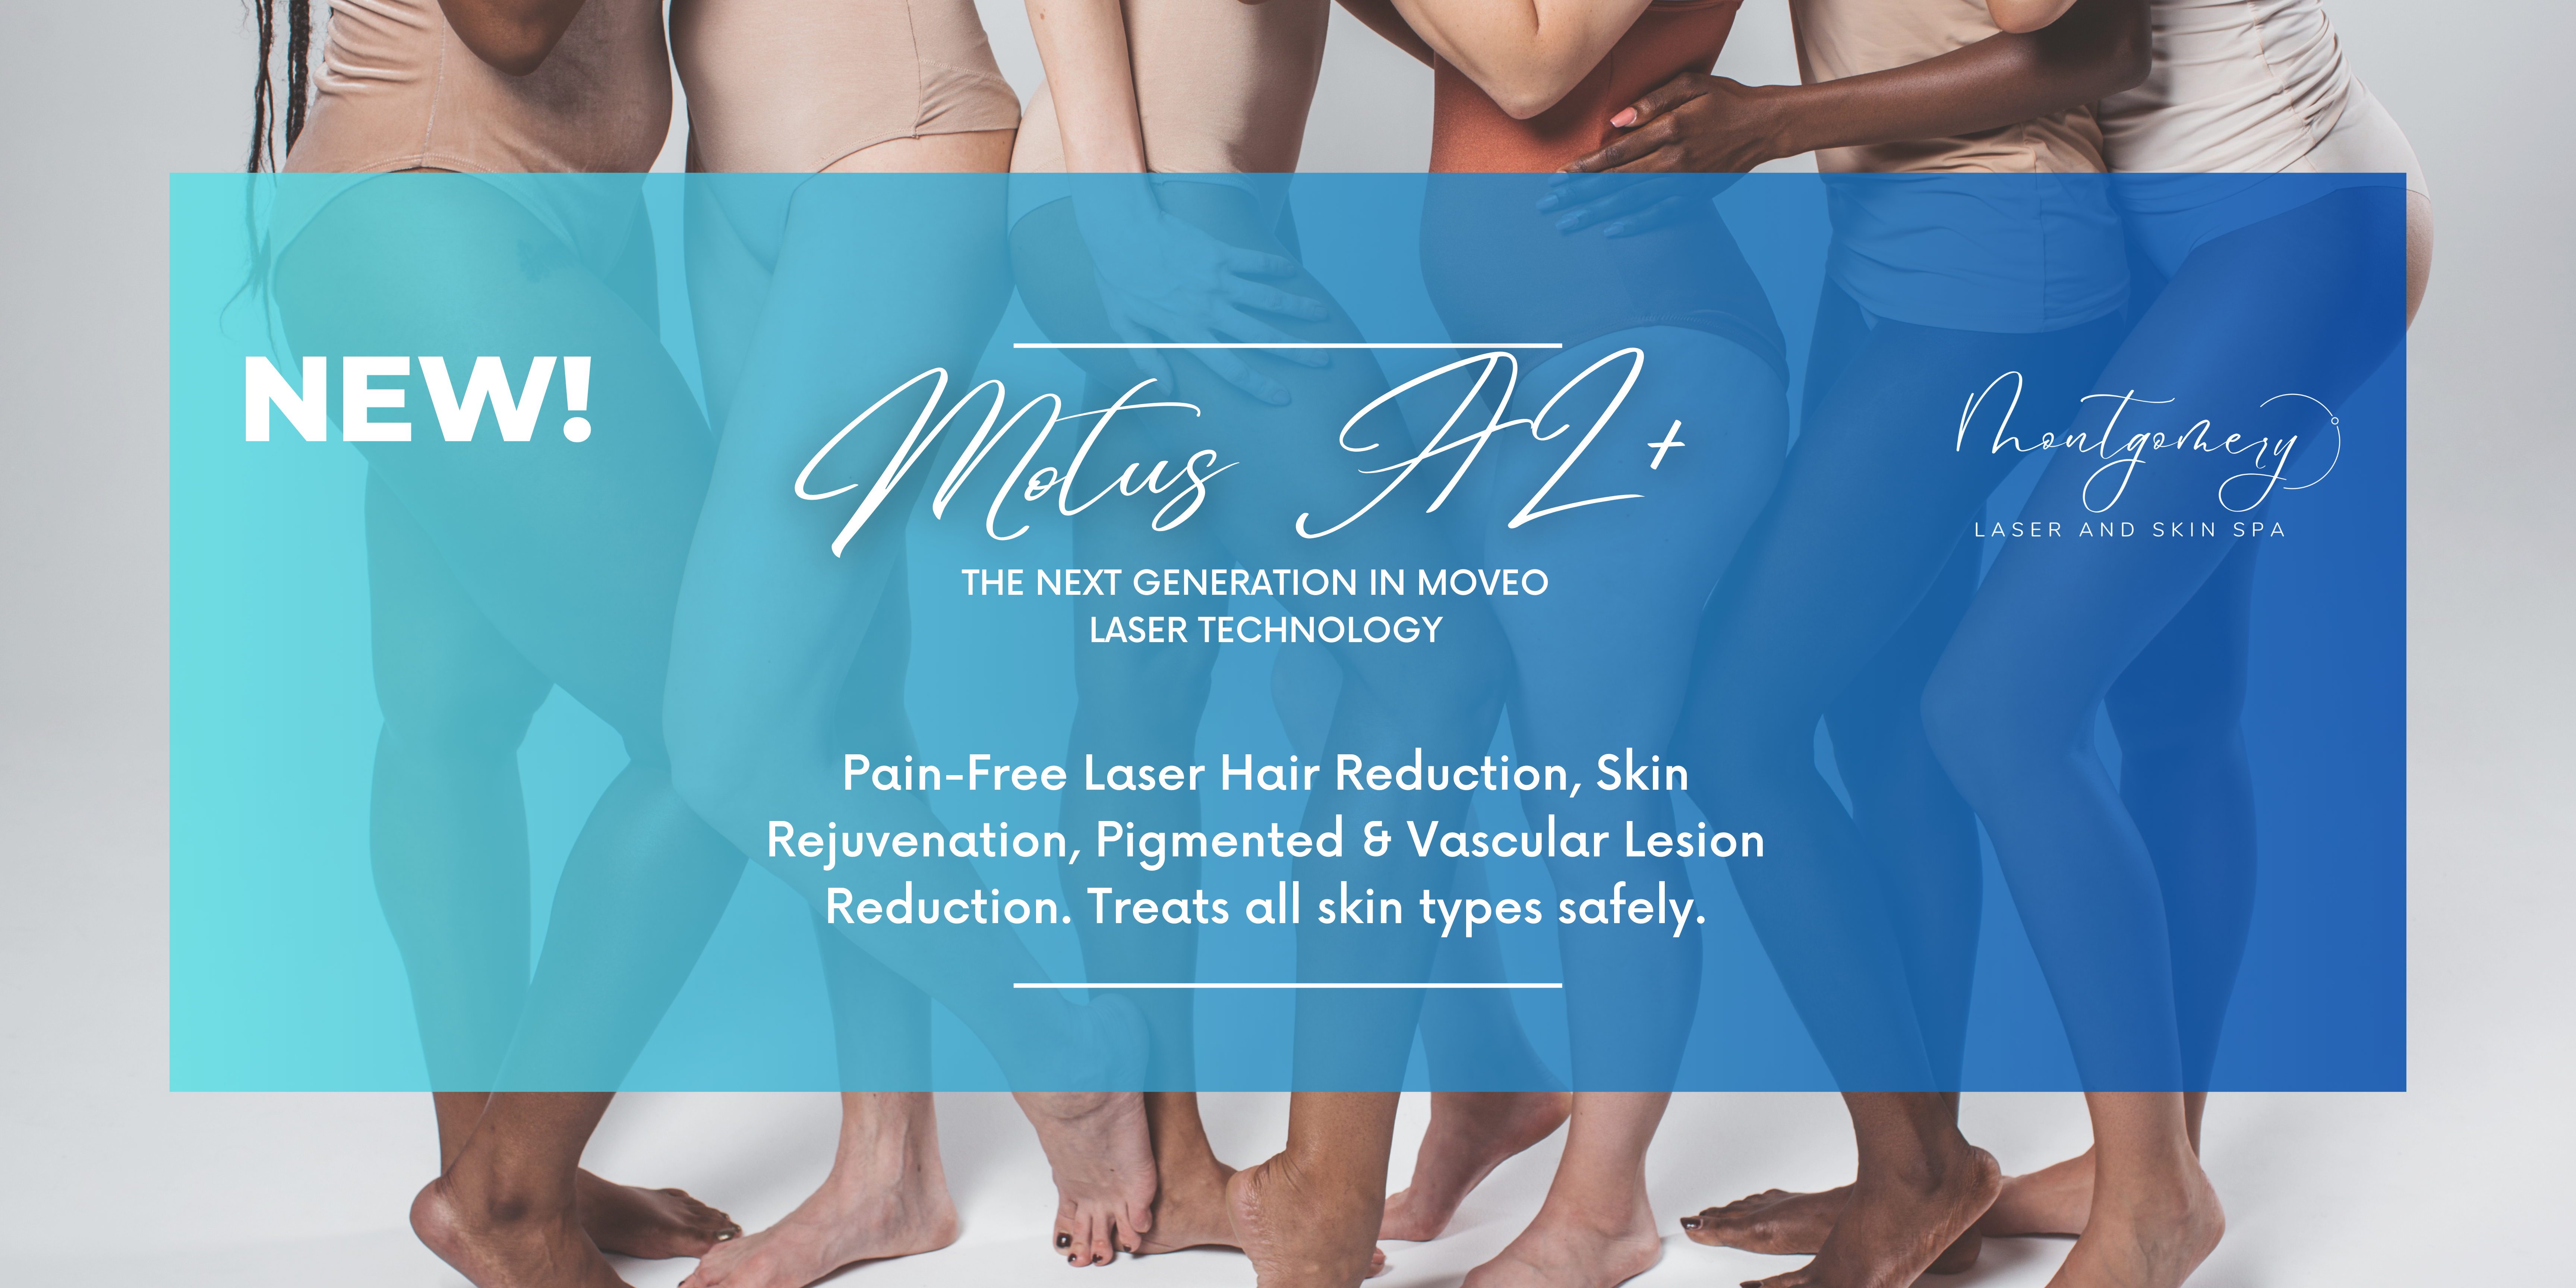 Pain-Free Laser Hair Removal is possible with the Motus AZ+ system 